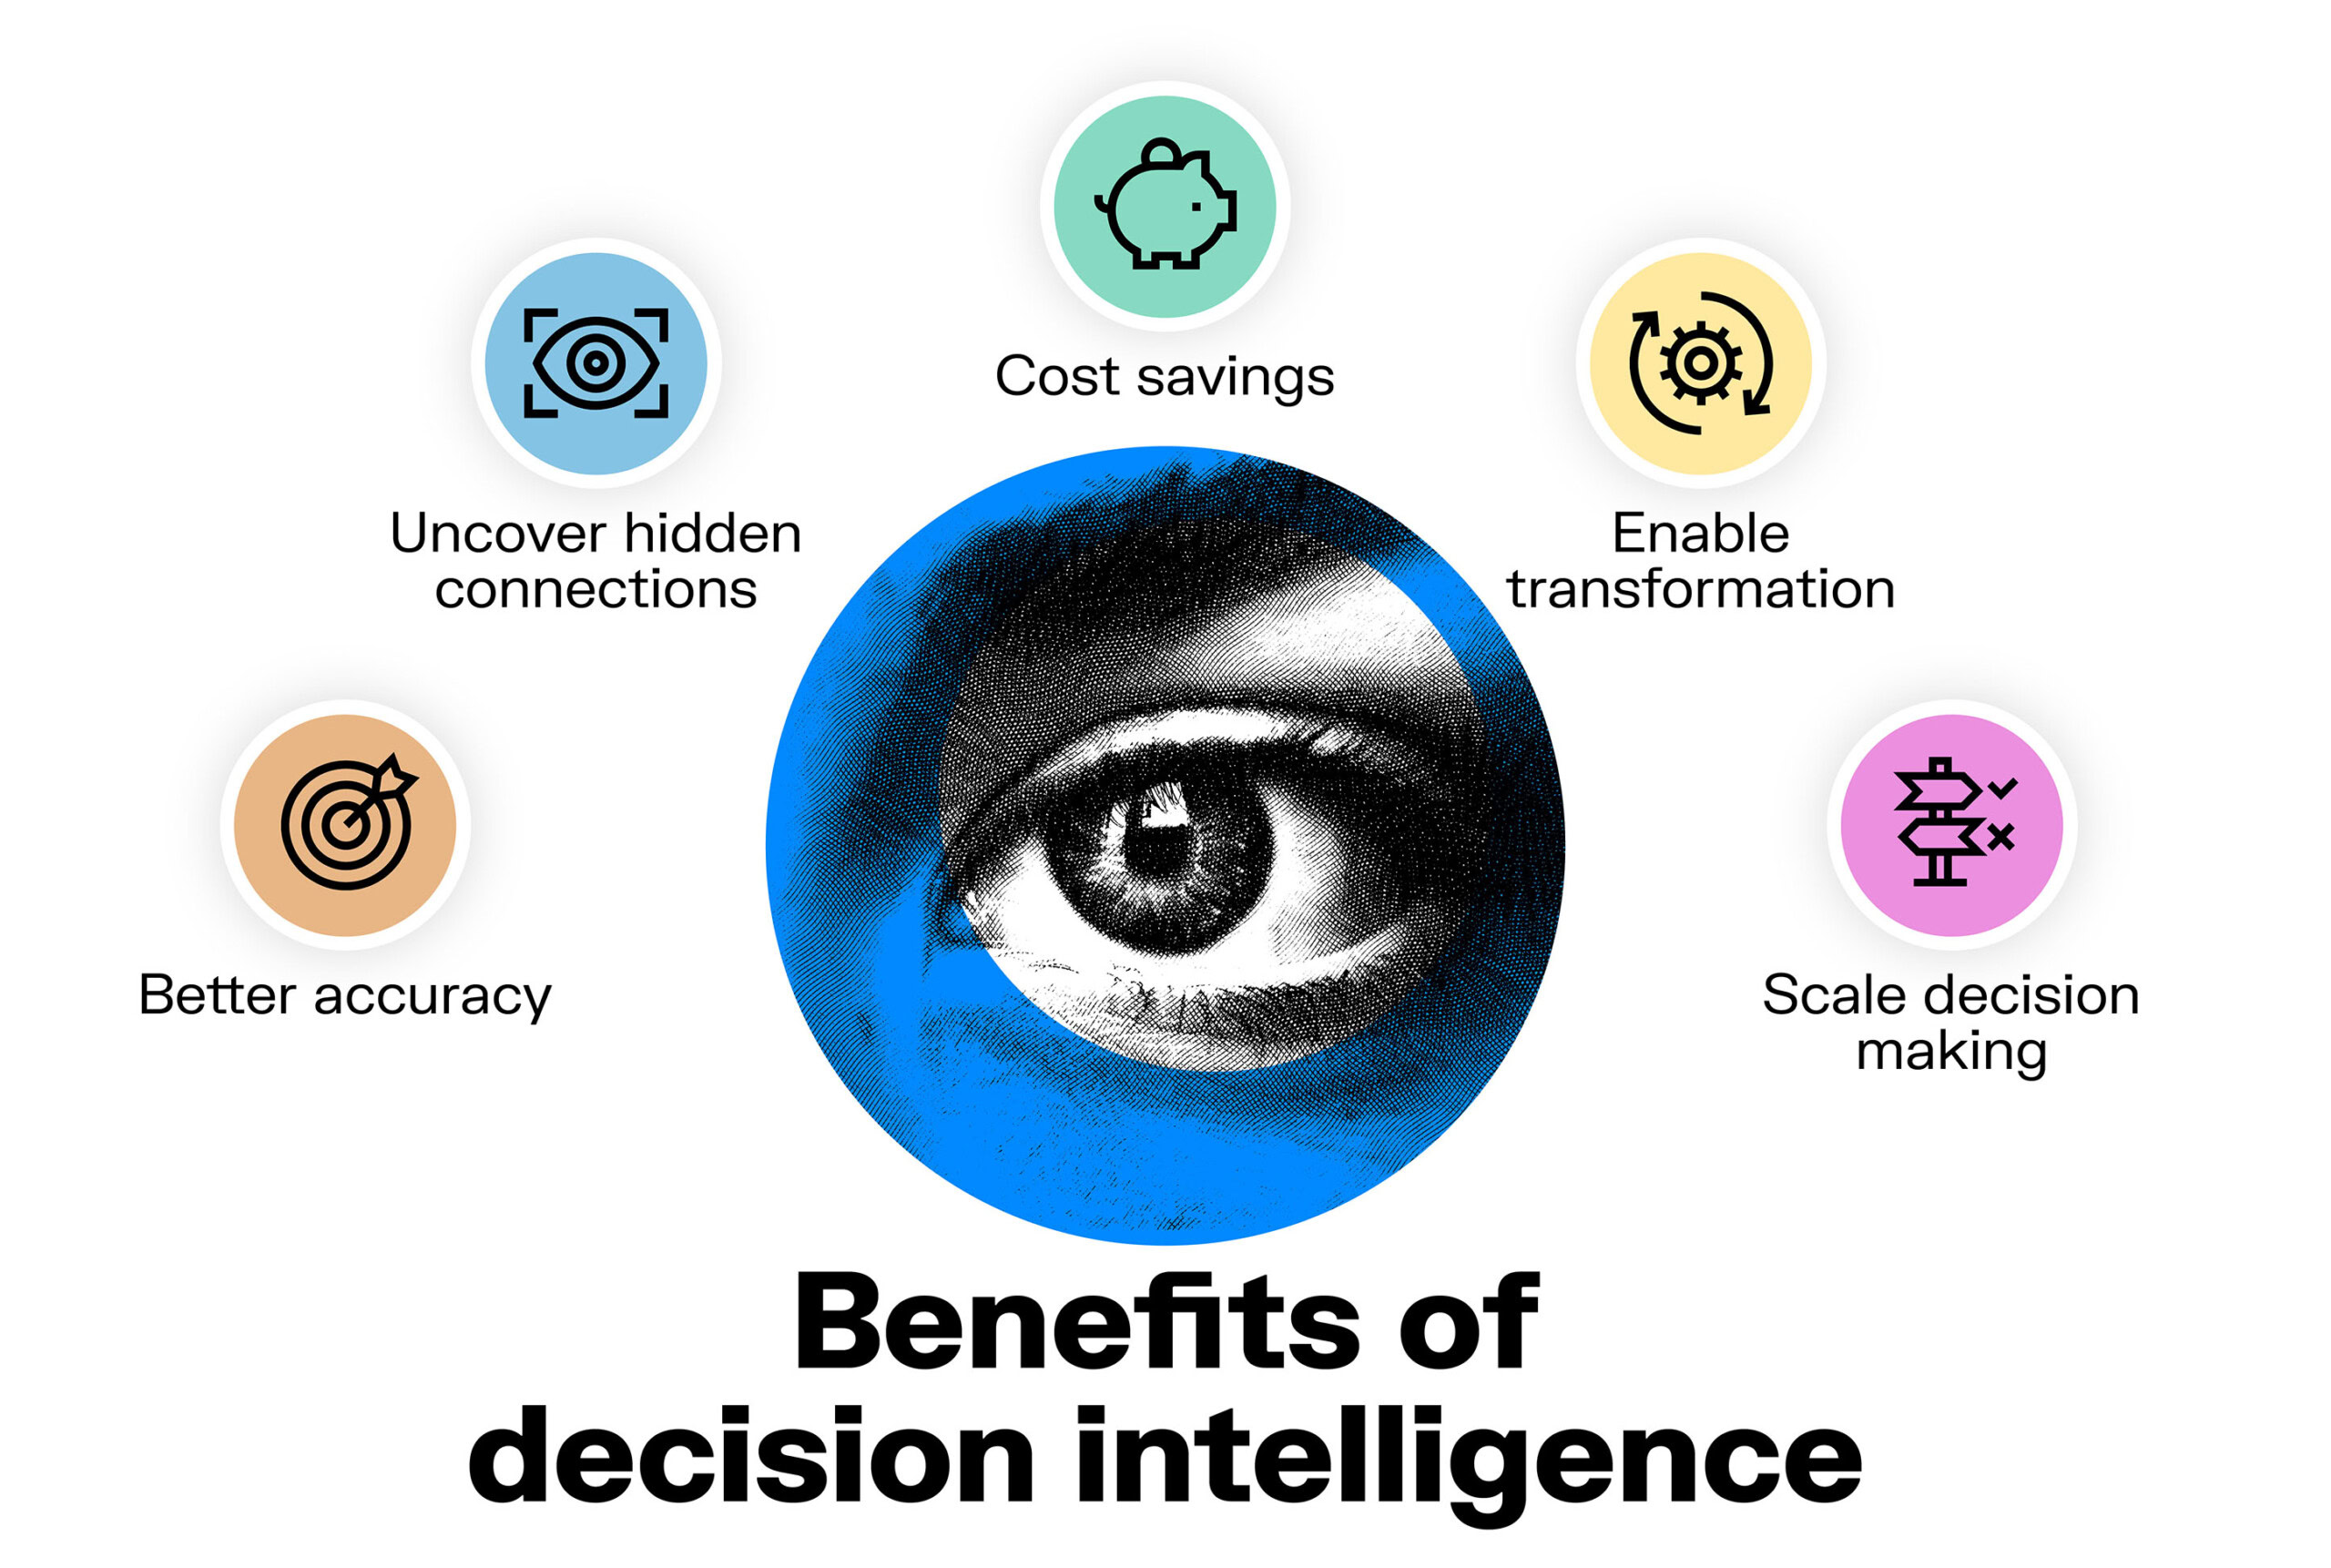 The benefits of decision intelligence